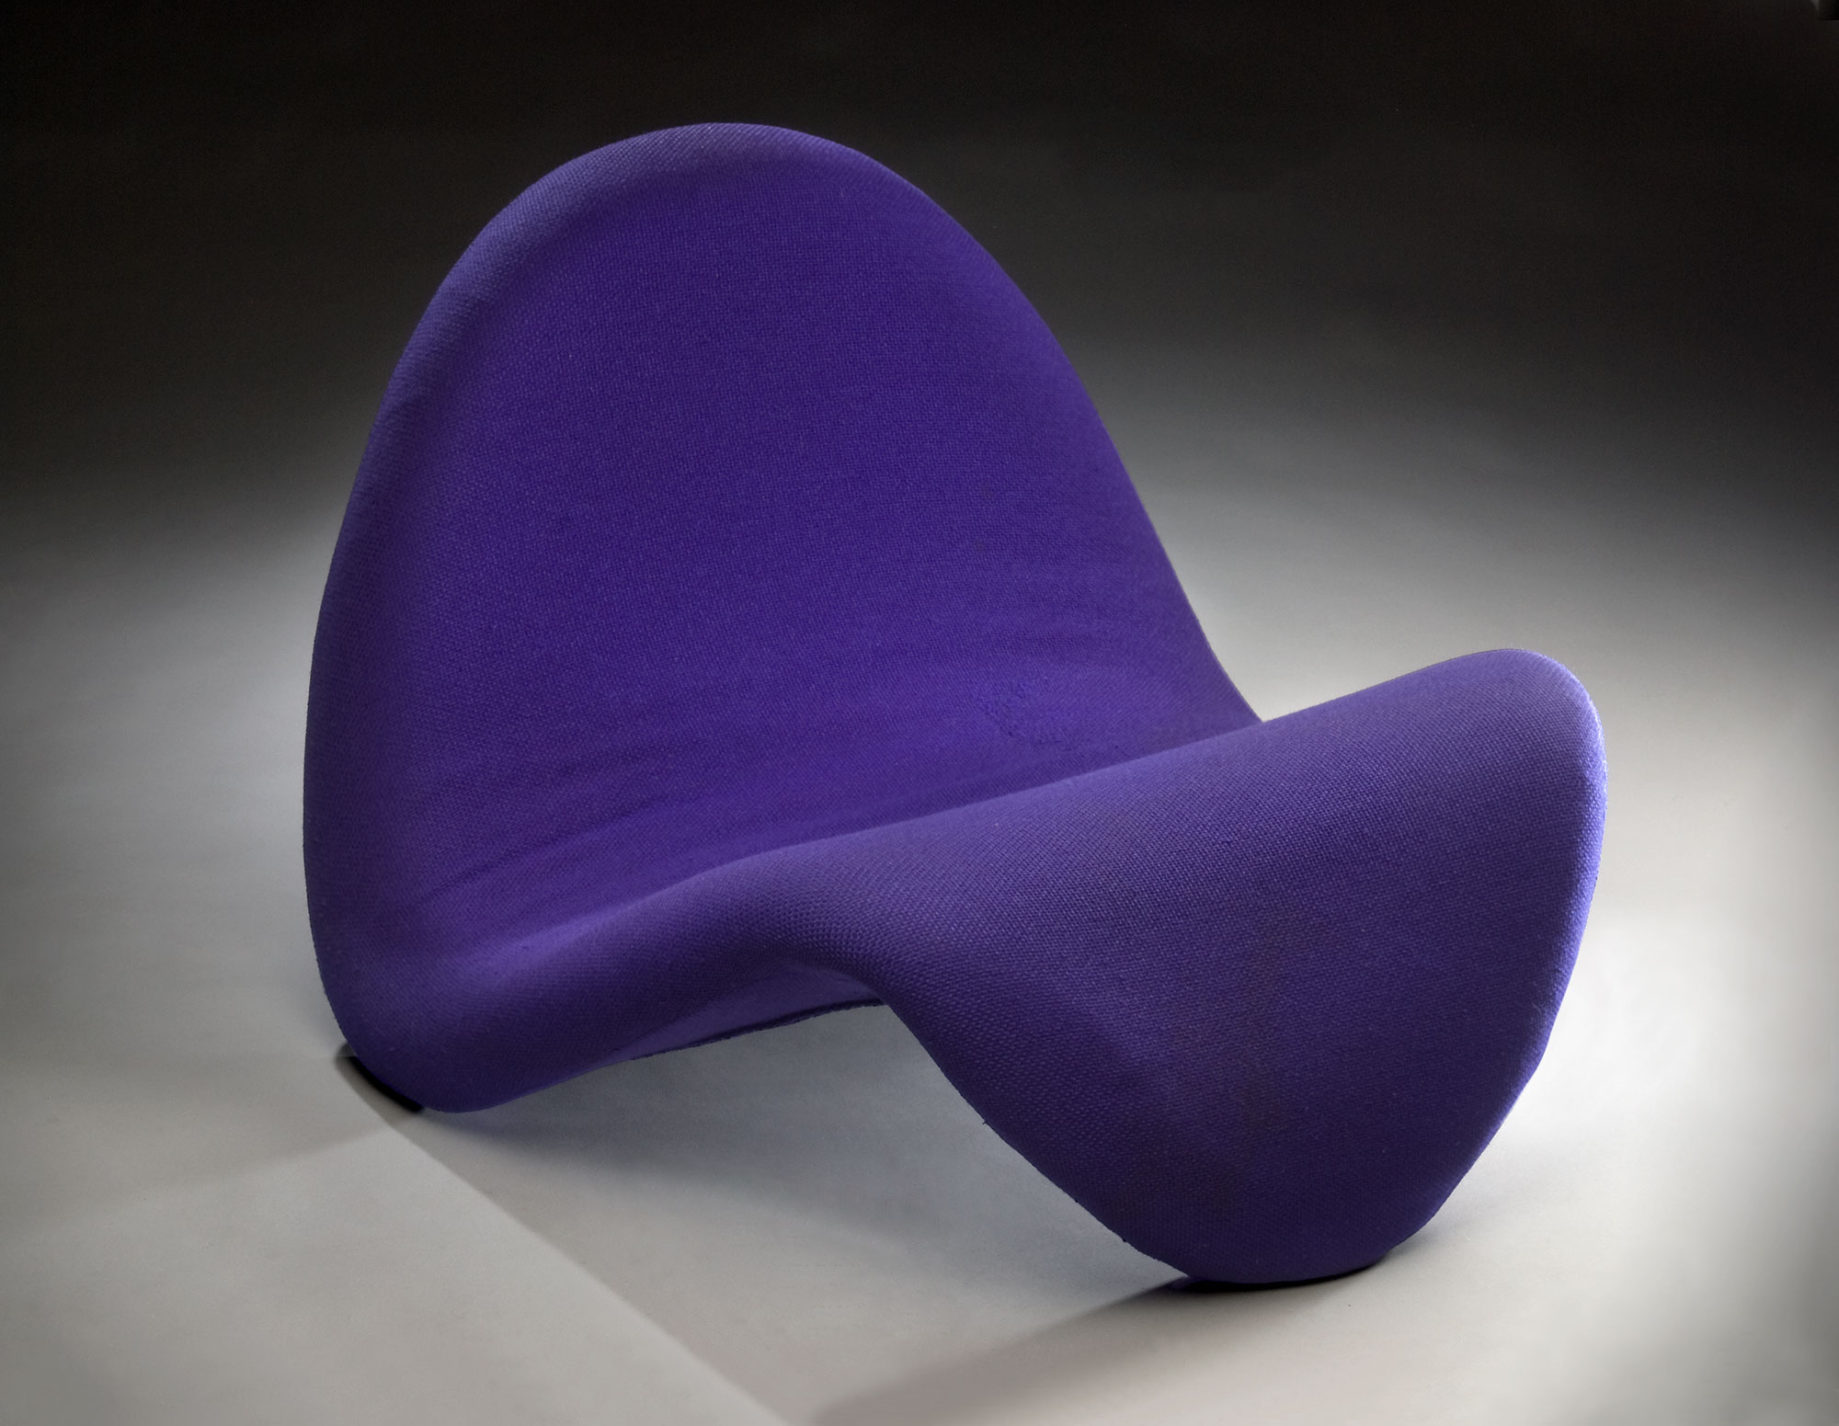 Curved lounge chair, back and front composed of a single undulating form covered in purple upholstery.